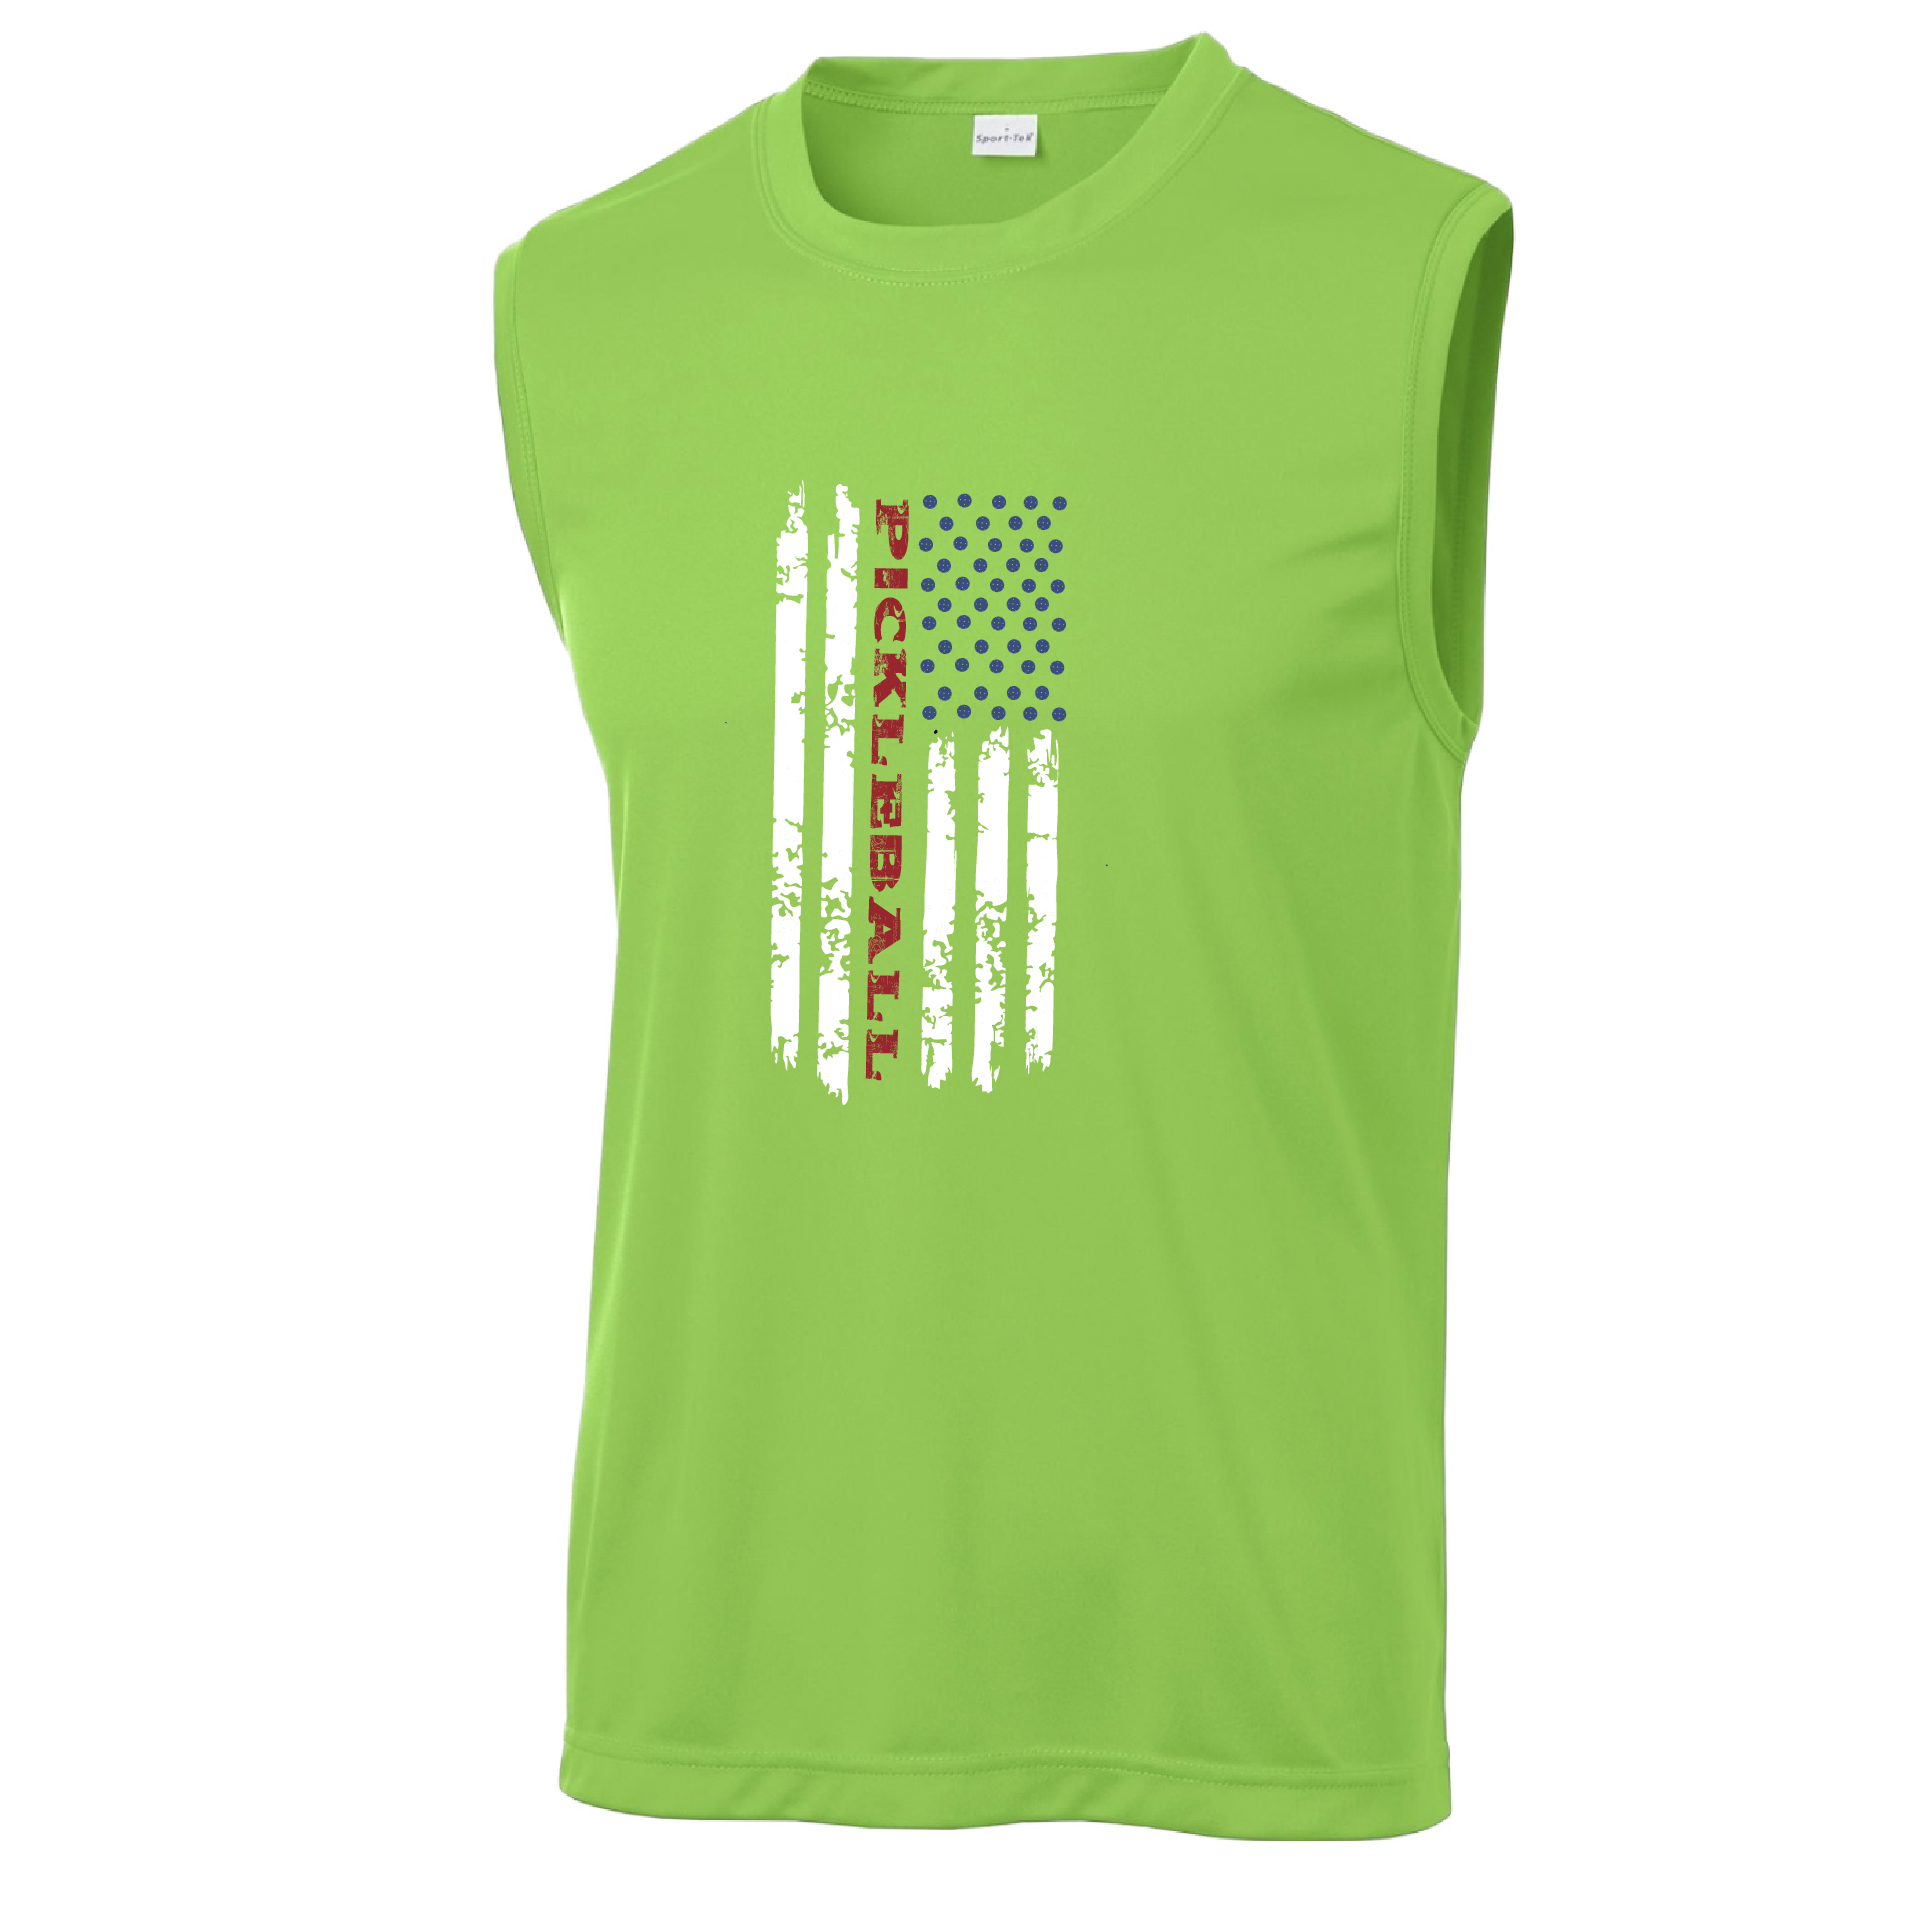 Pickleball Design: Pickleball Vertical Flag on Front or Back Shirt  Men's Styles: Sleeveless  Shirts are lightweight, roomy and highly breathable. These moisture-wicking shirts are designed for athletic performance. They feature PosiCharge technology to lock in color and prevent logos from fading. Removable tag and set-in sleeves for comfort.